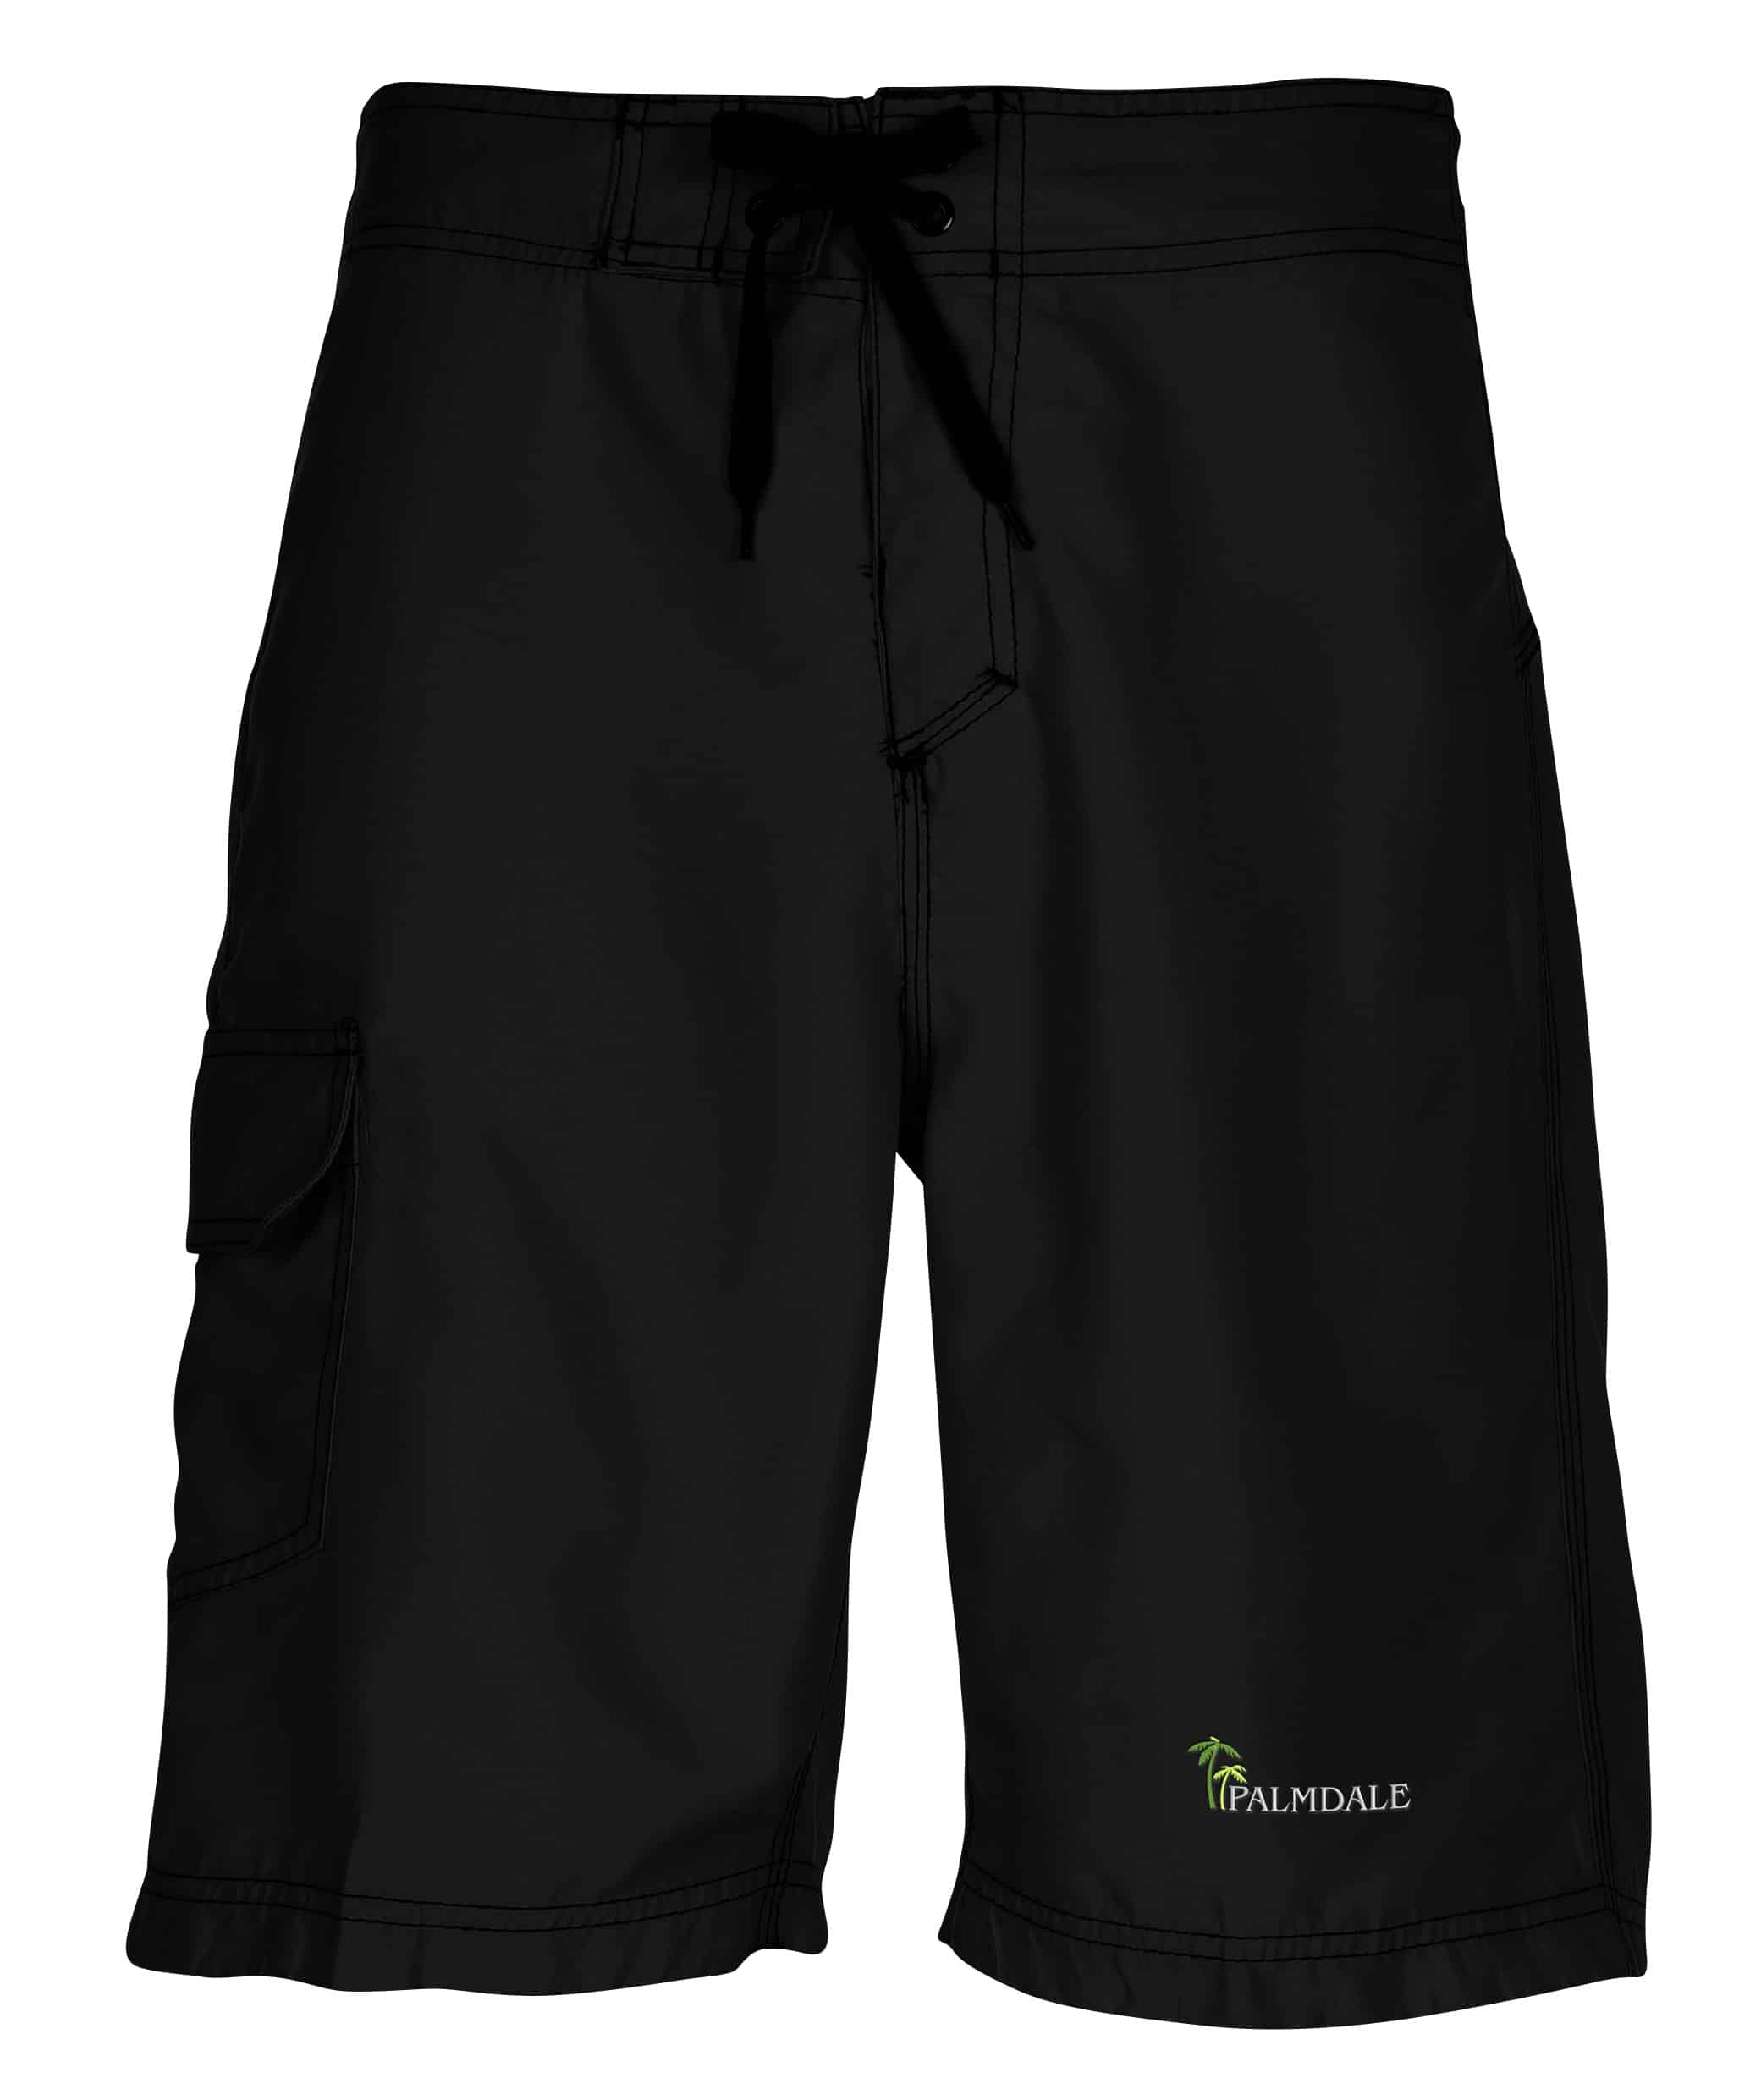 A pair of black Burnside Solid Board Shorts.